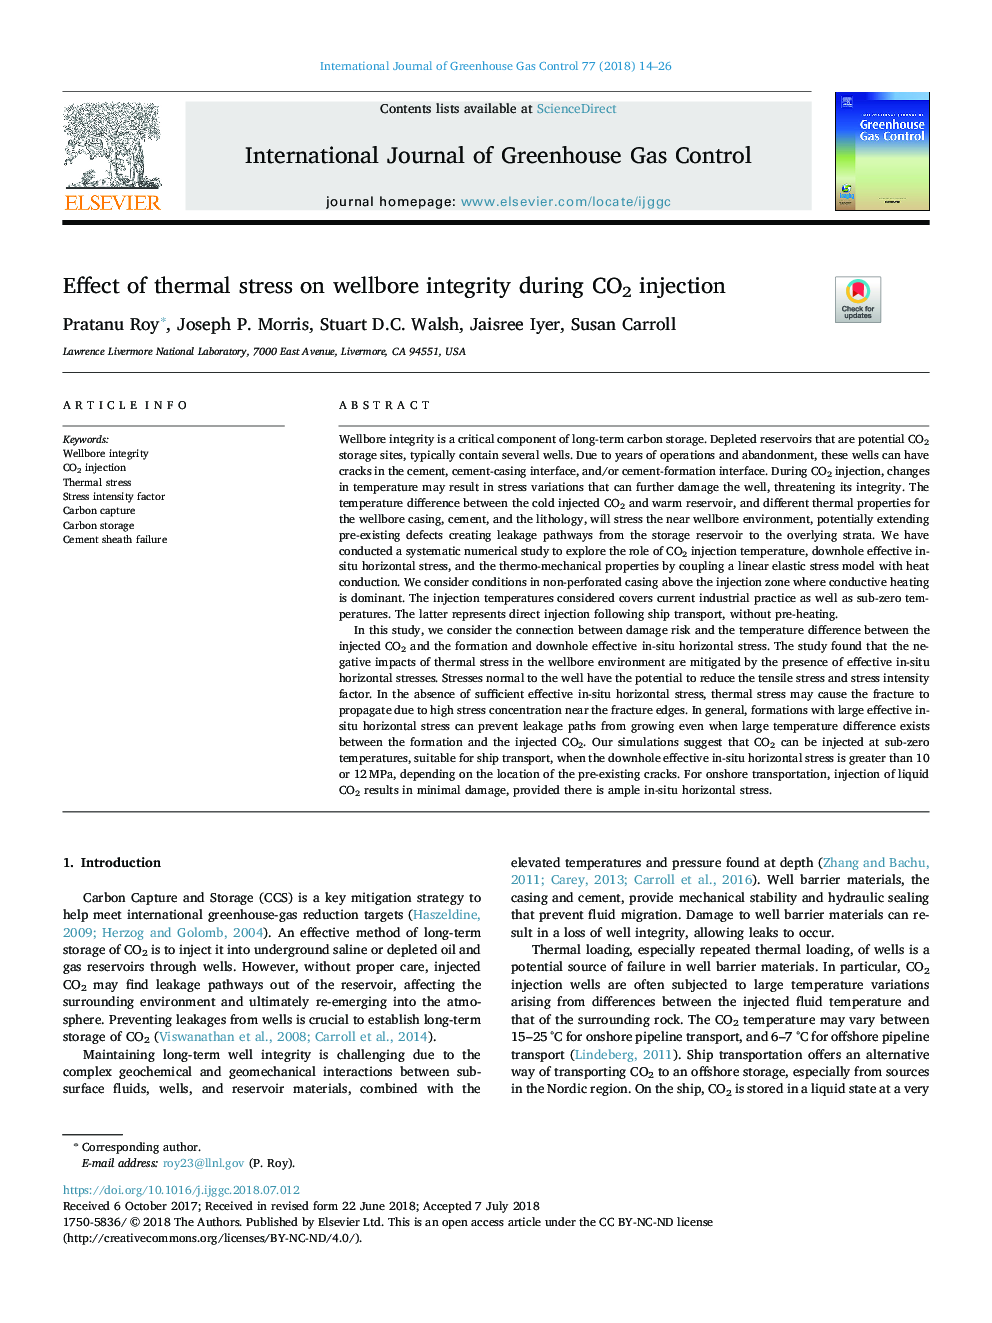 Effect of thermal stress on wellbore integrity during CO2 injection